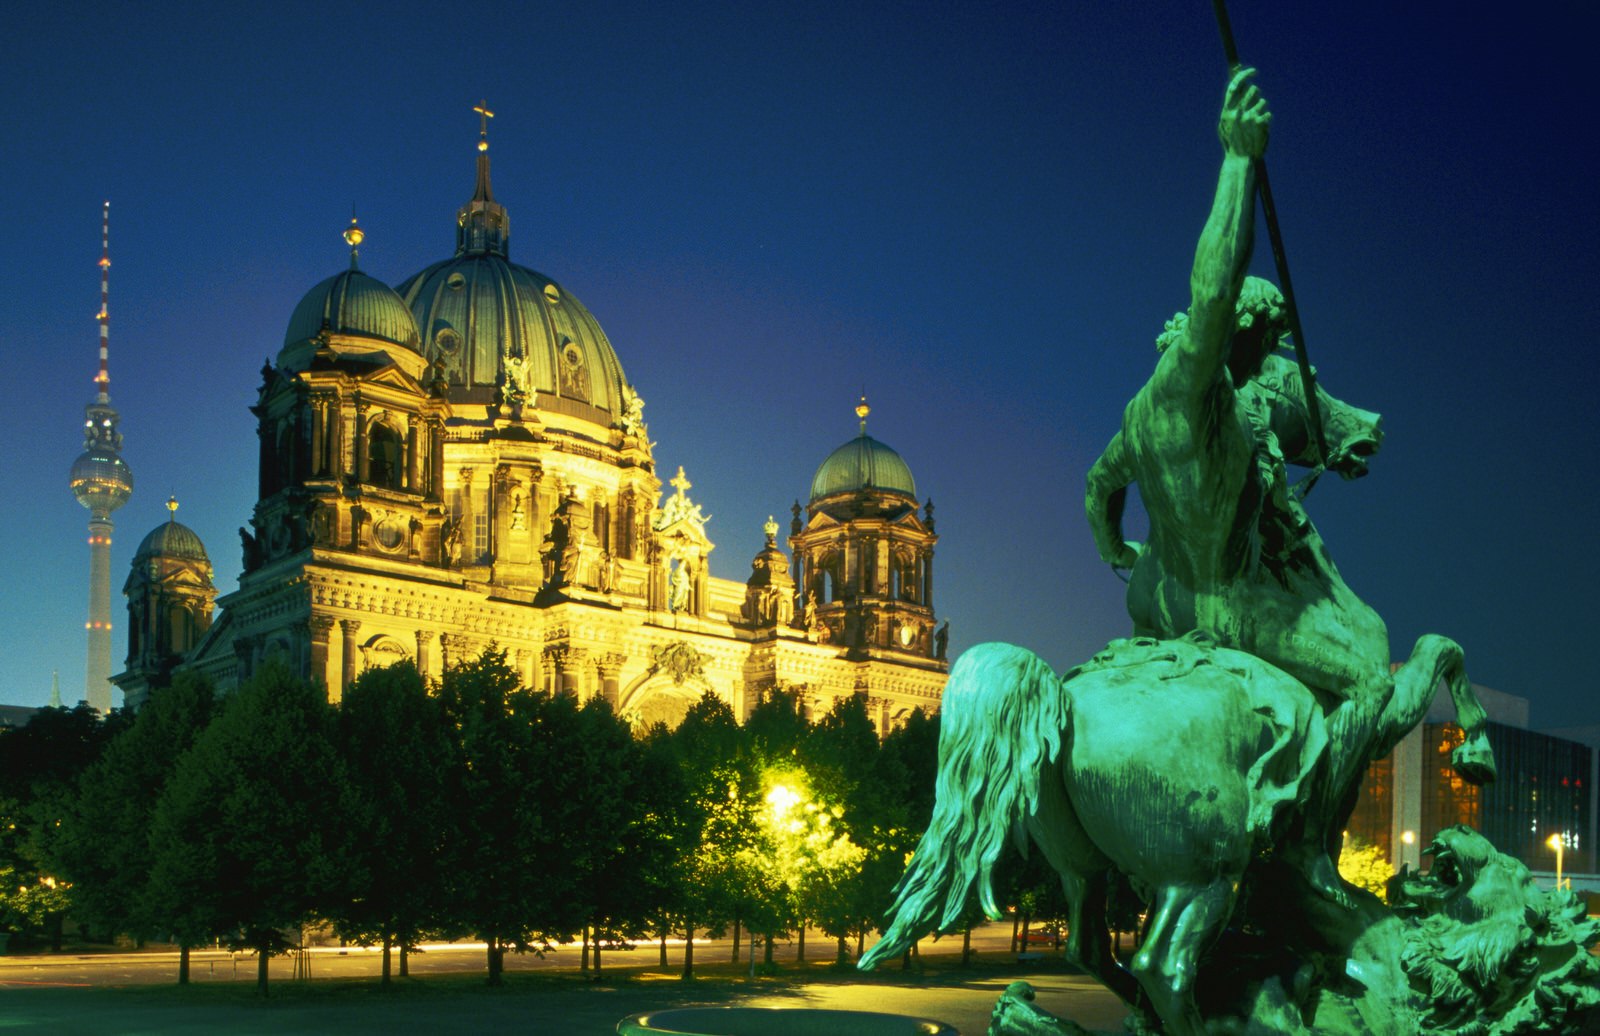 Berlin Cathedral illuminated at night, seen from the Altes Museum.